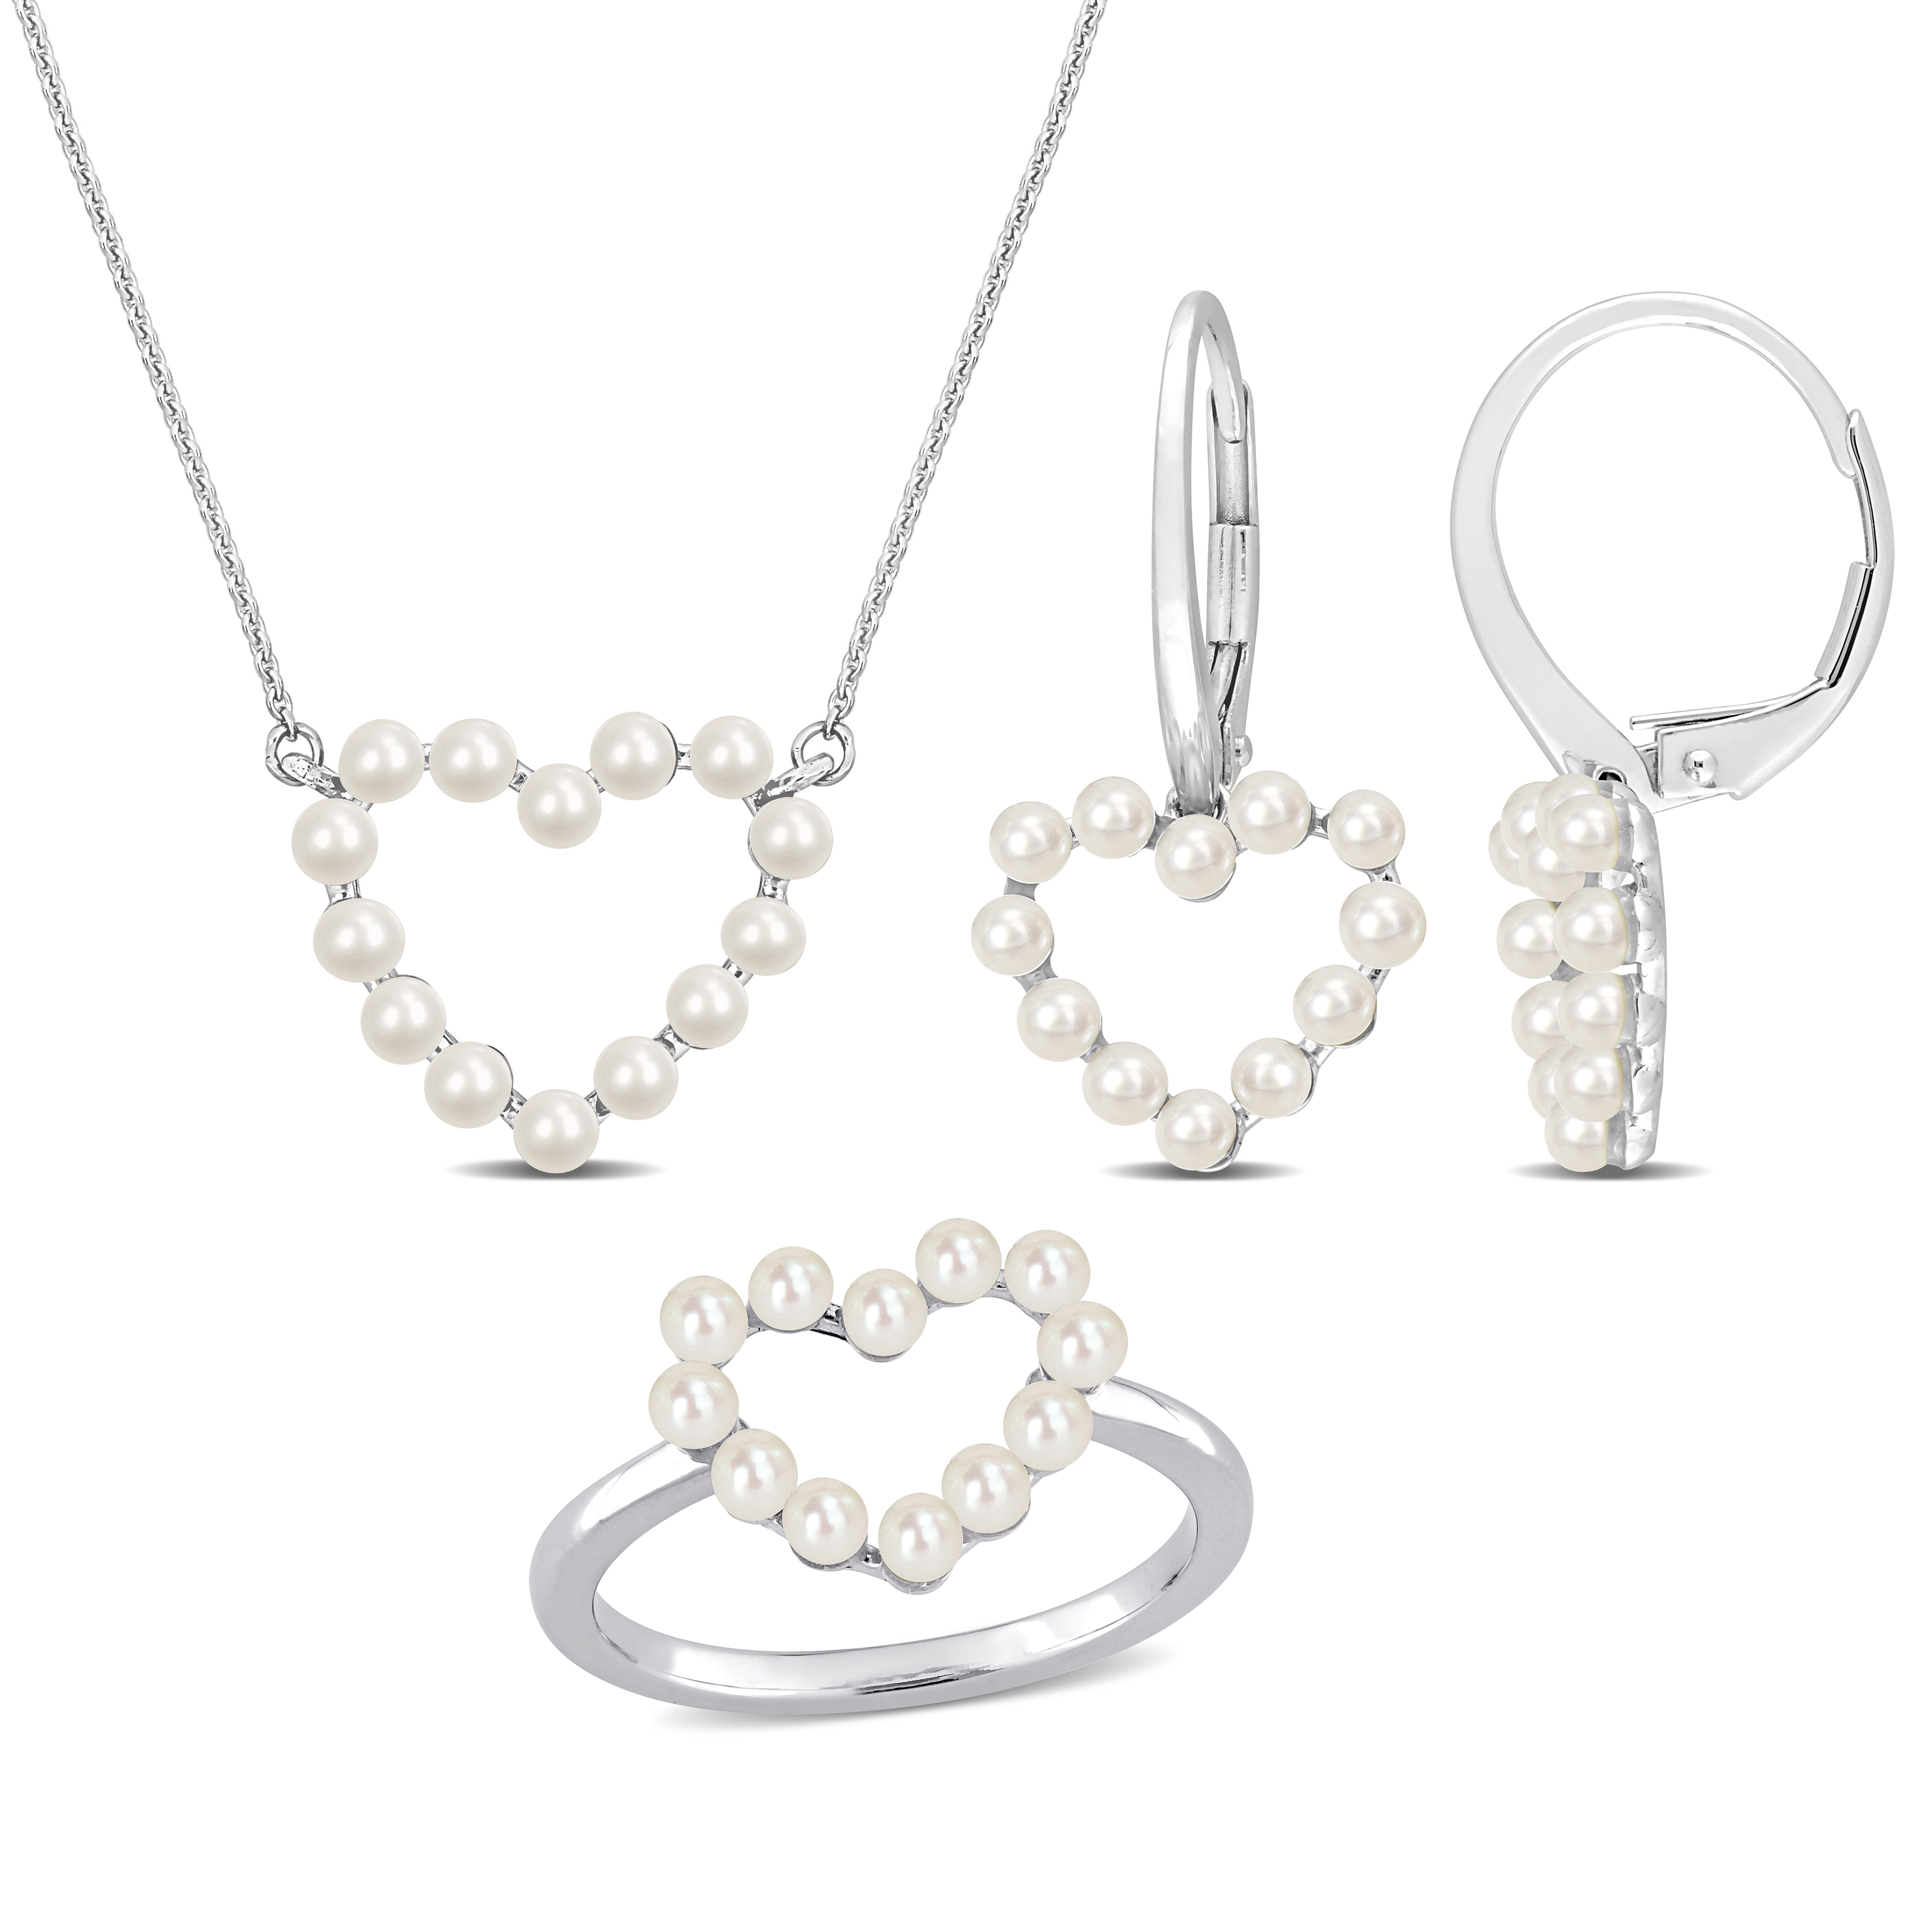 Cultured Freshwater Pearl 3-Piece Jewelry Set - Heart Pendant with Chain, Earrings and Ring in 14k White Gold